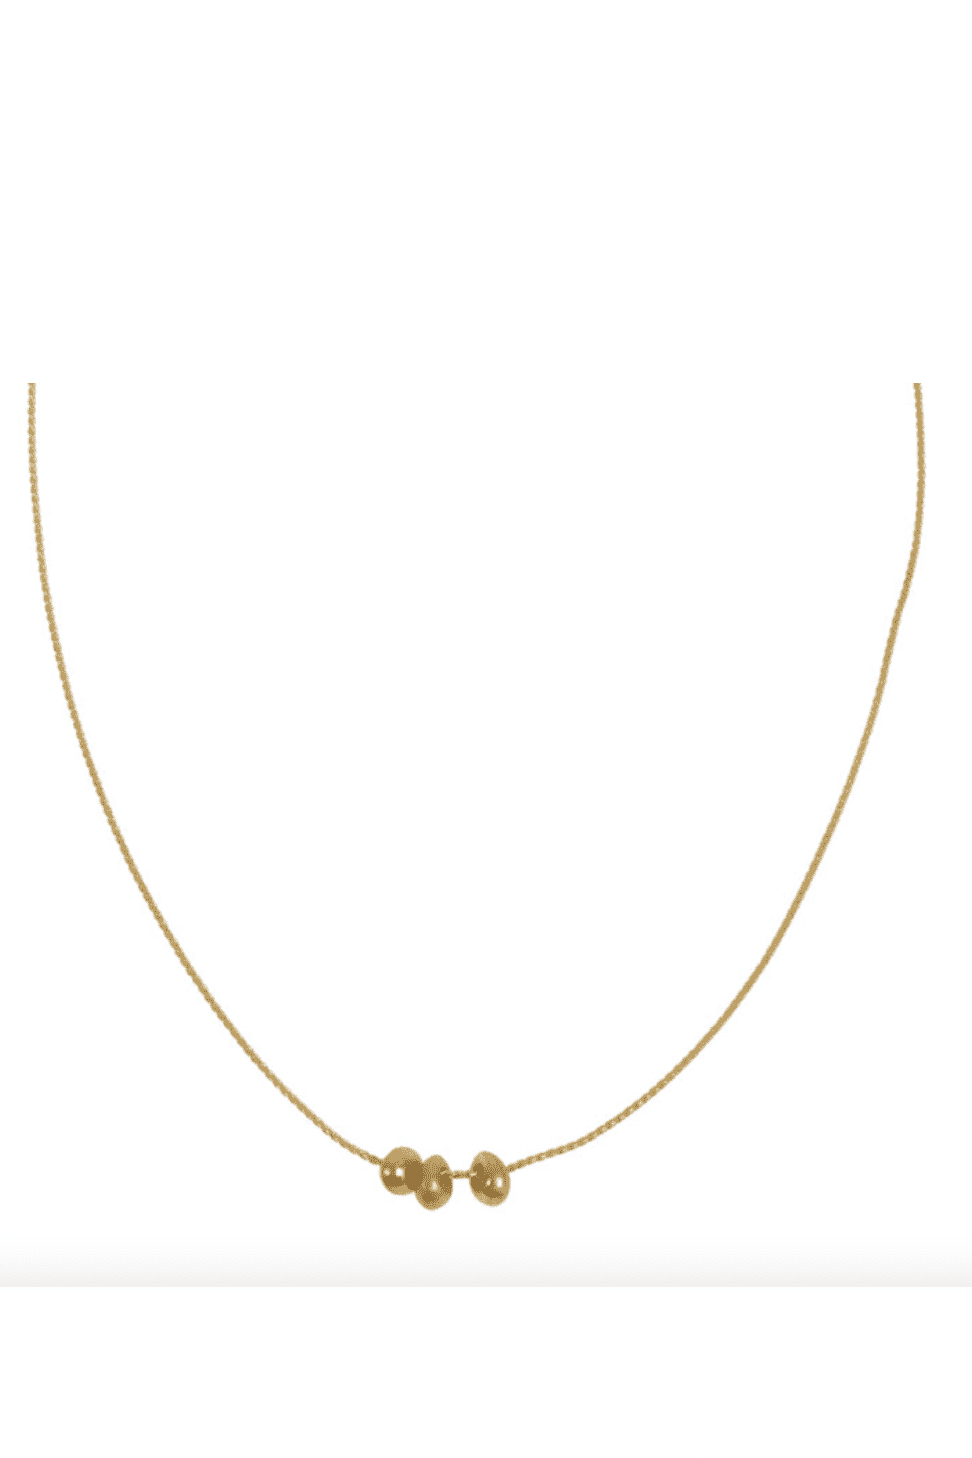 3 bead necklace in Gold